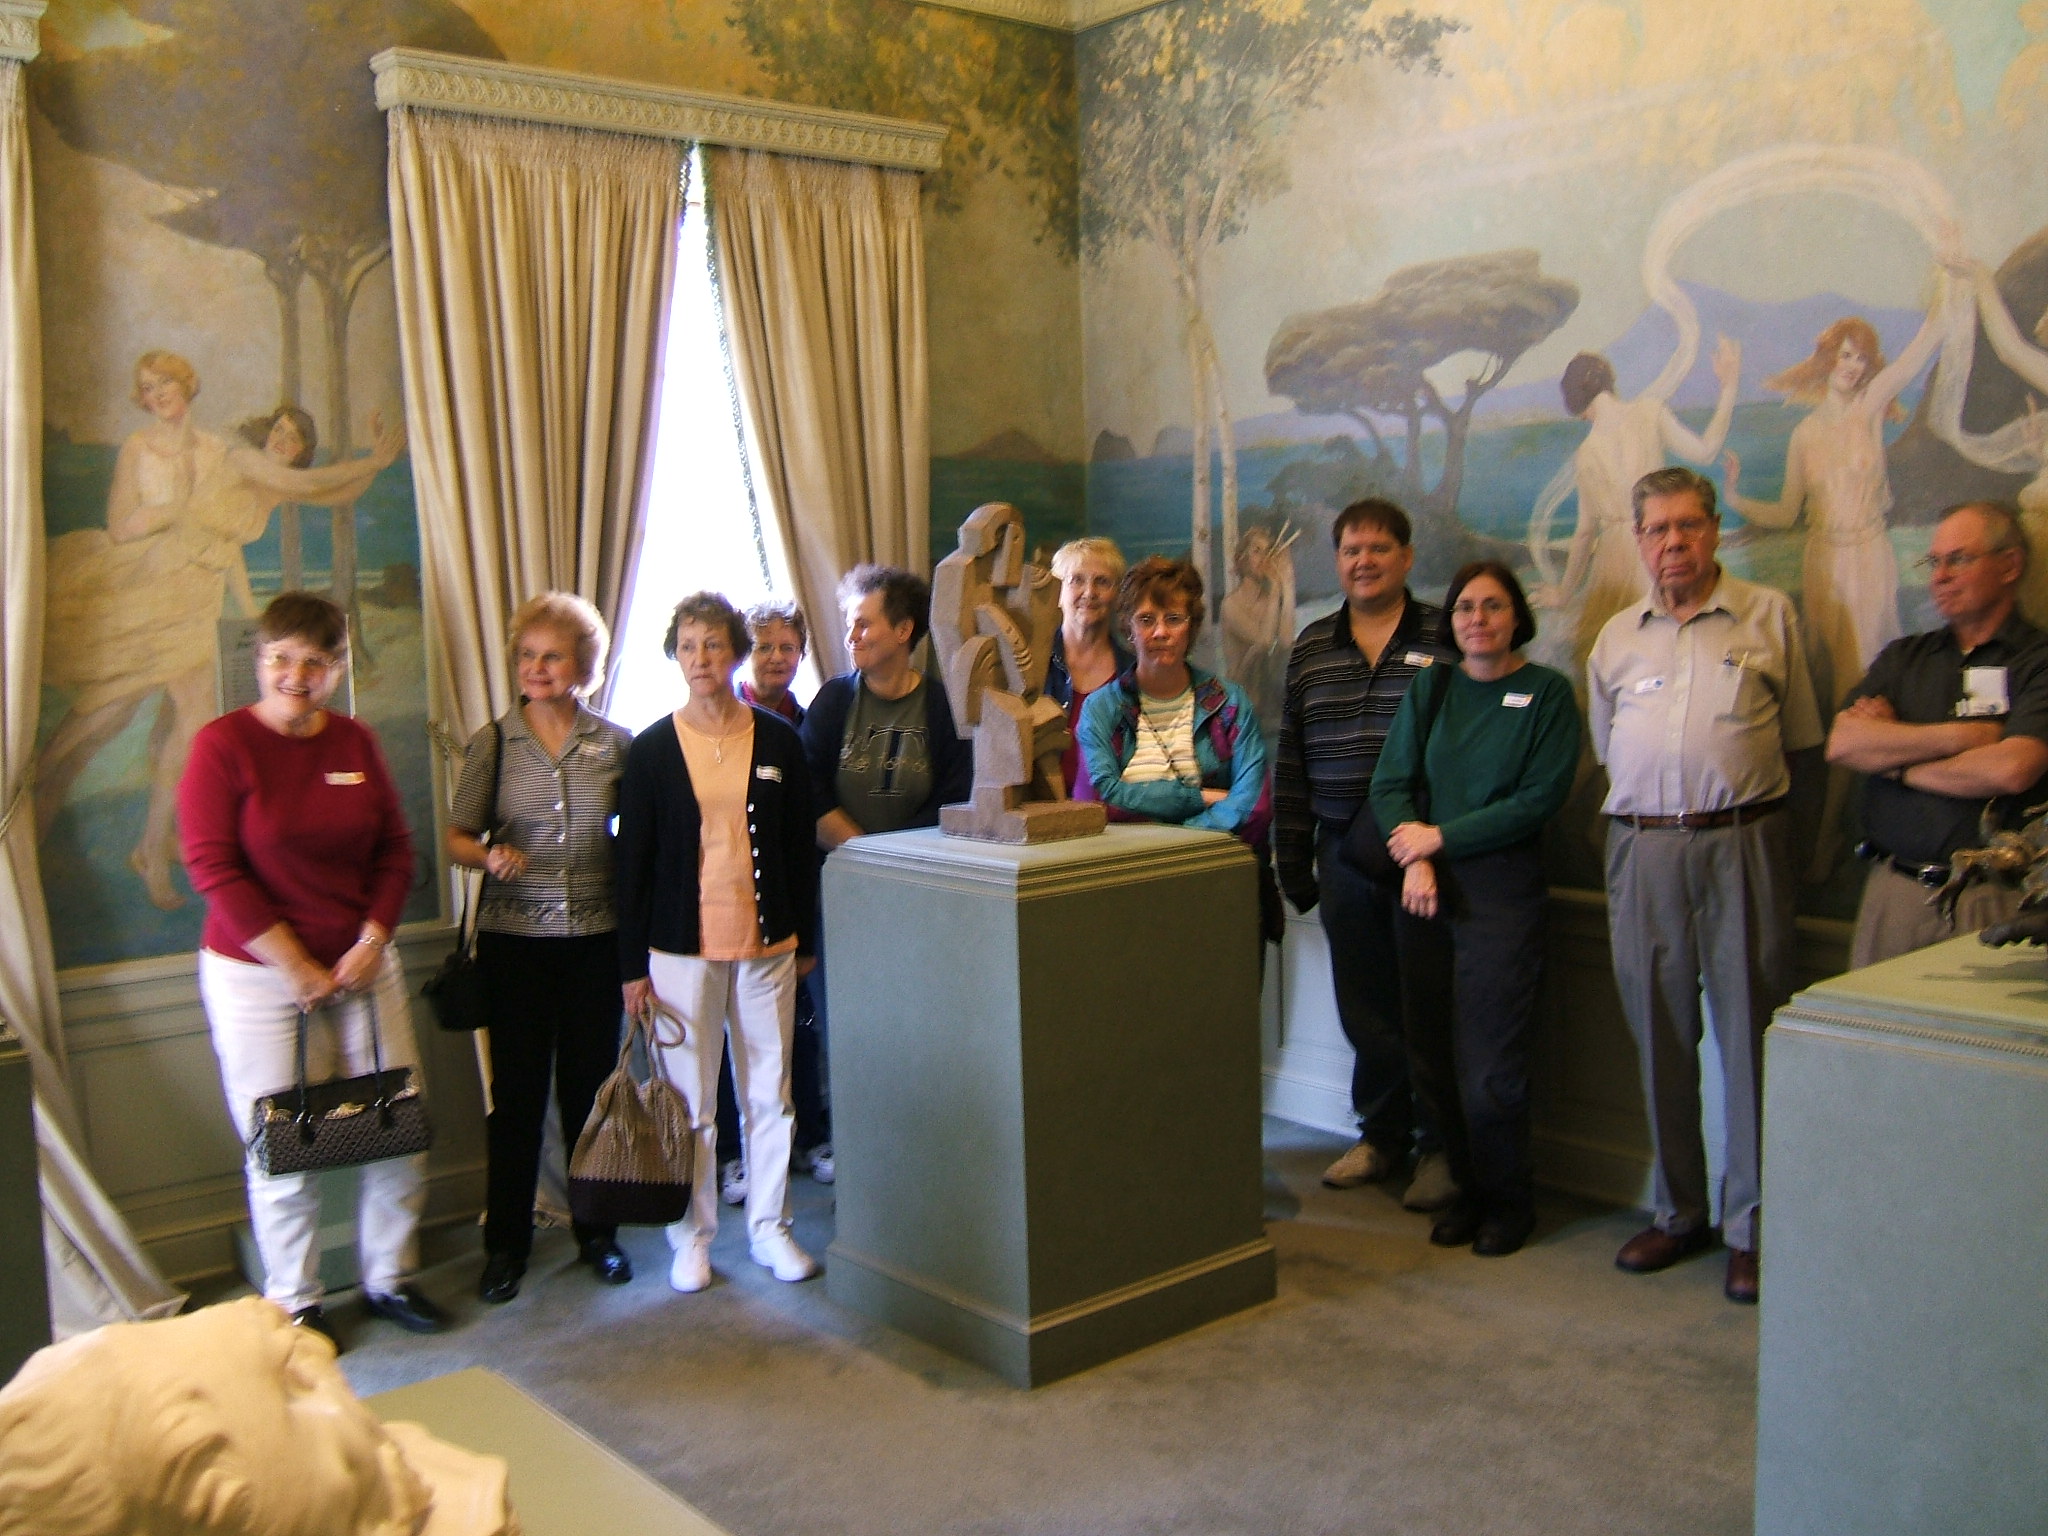 Partial group in Philbrook exhibit room